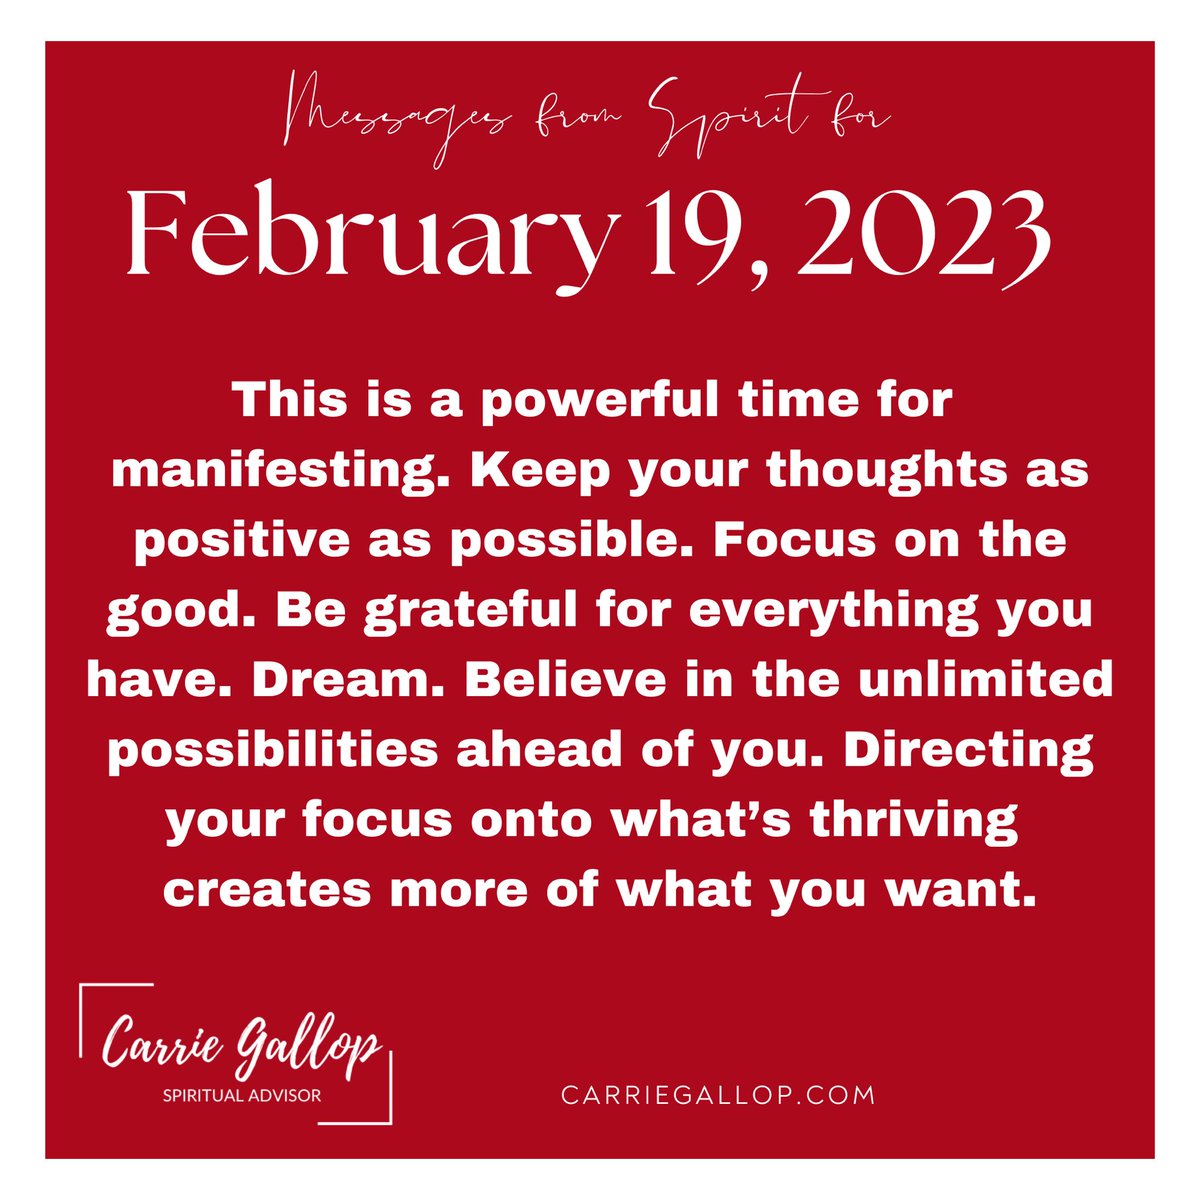 Messages From Spirit for February 19, 2023 ✨

#Daily #Guidance #Message #MessagesFromSpirit #February19 #Feb19 #Powerful #Manifesting #Manifestation #KeepYourThoughtsPositive #FocusOnTheGood #BeGrateful #Dream #Believe #UnlimitedPossibilities #Direct #Focus #Thrive